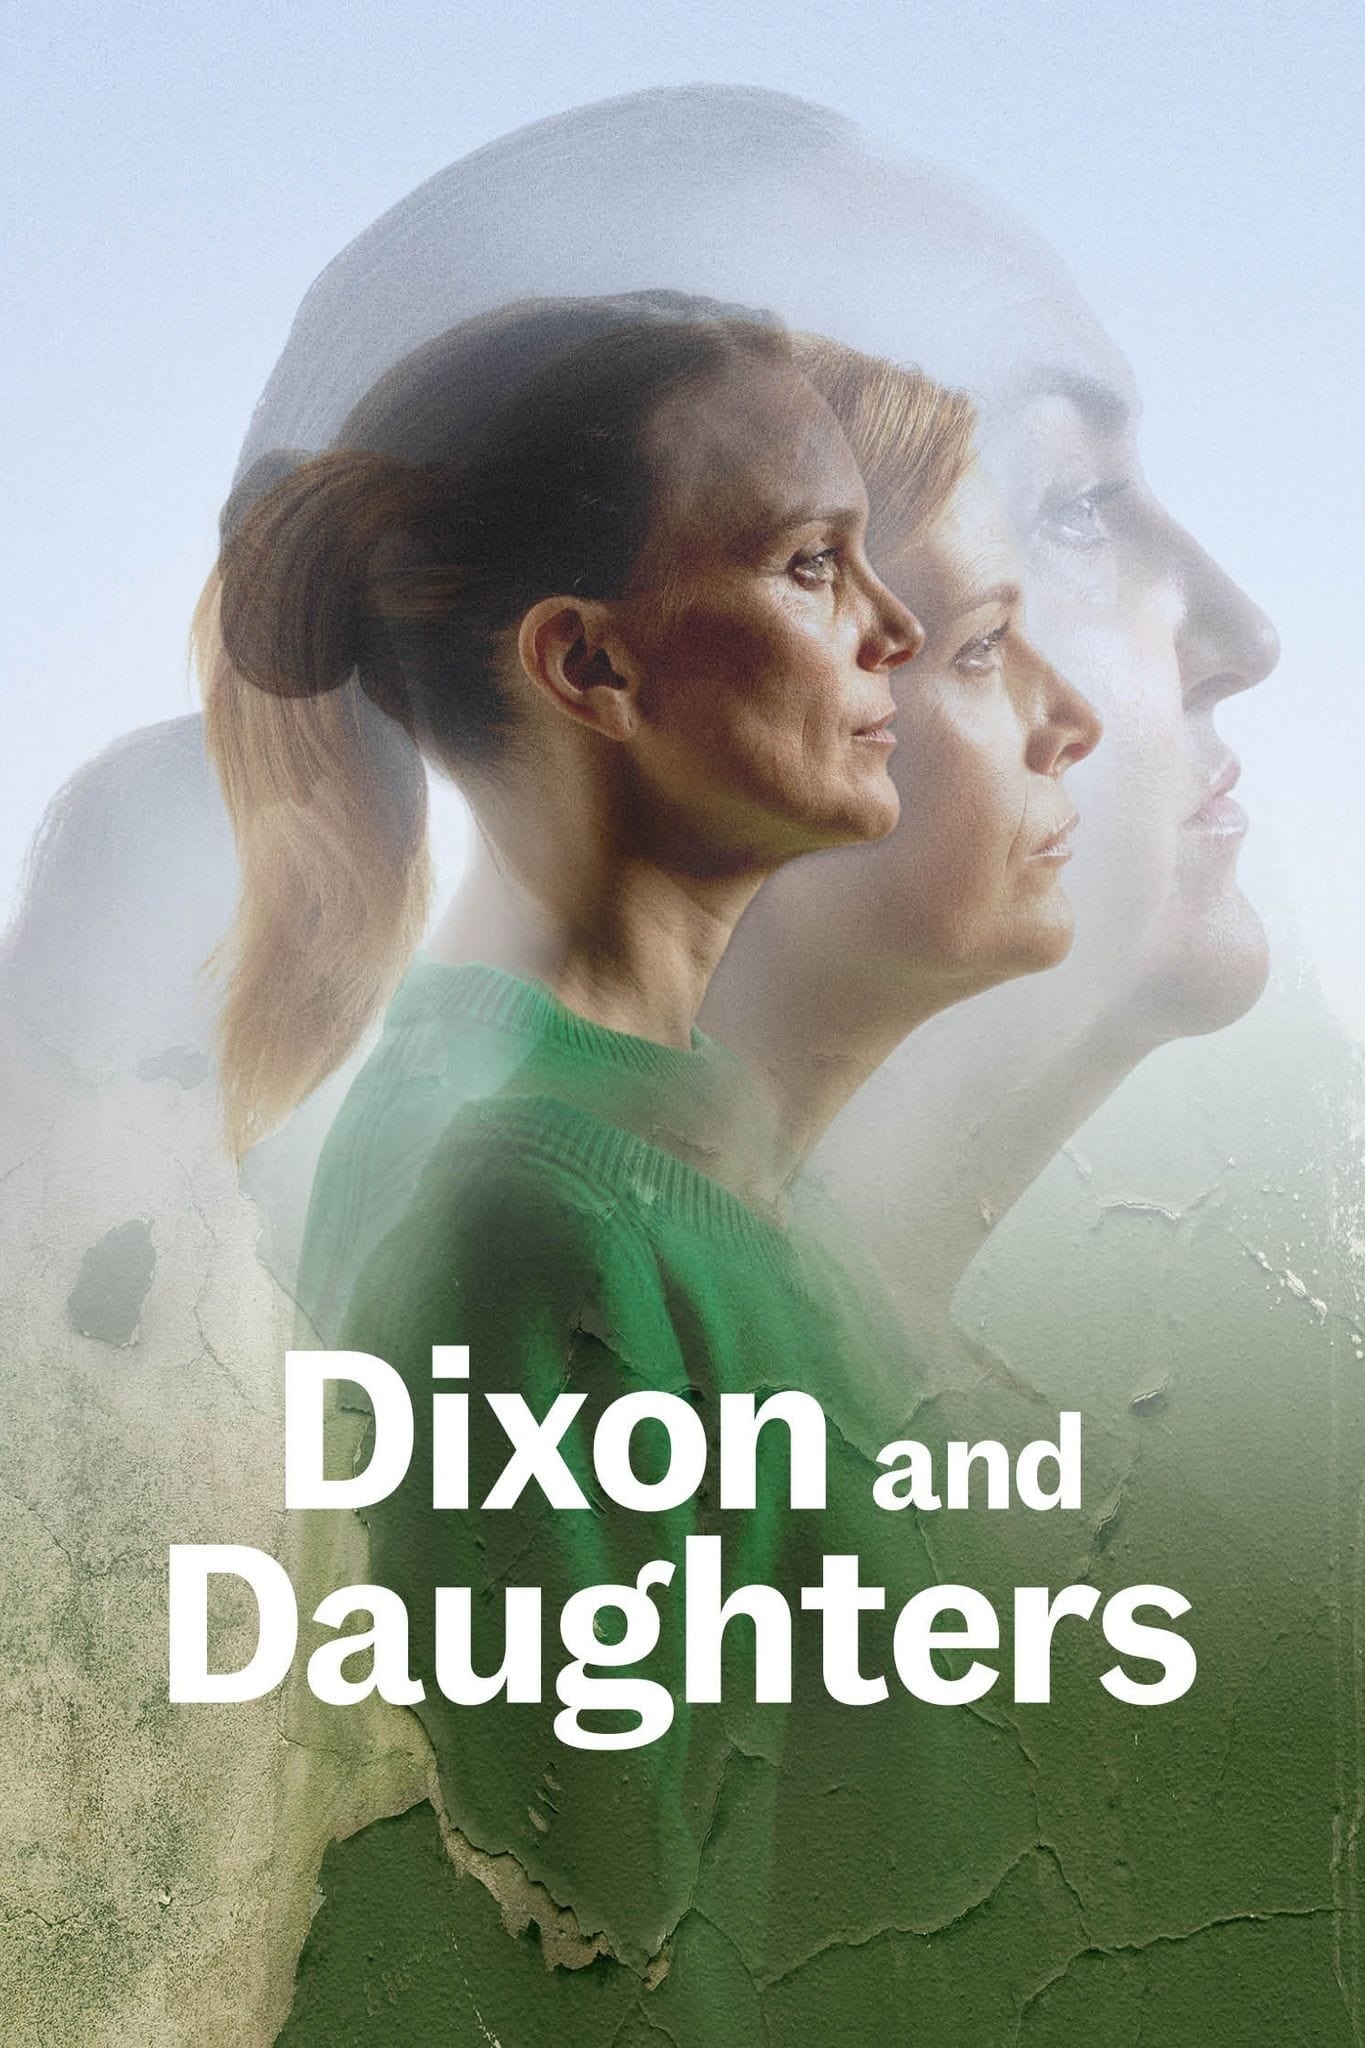 National Theatre Live: Dixon and Daughters